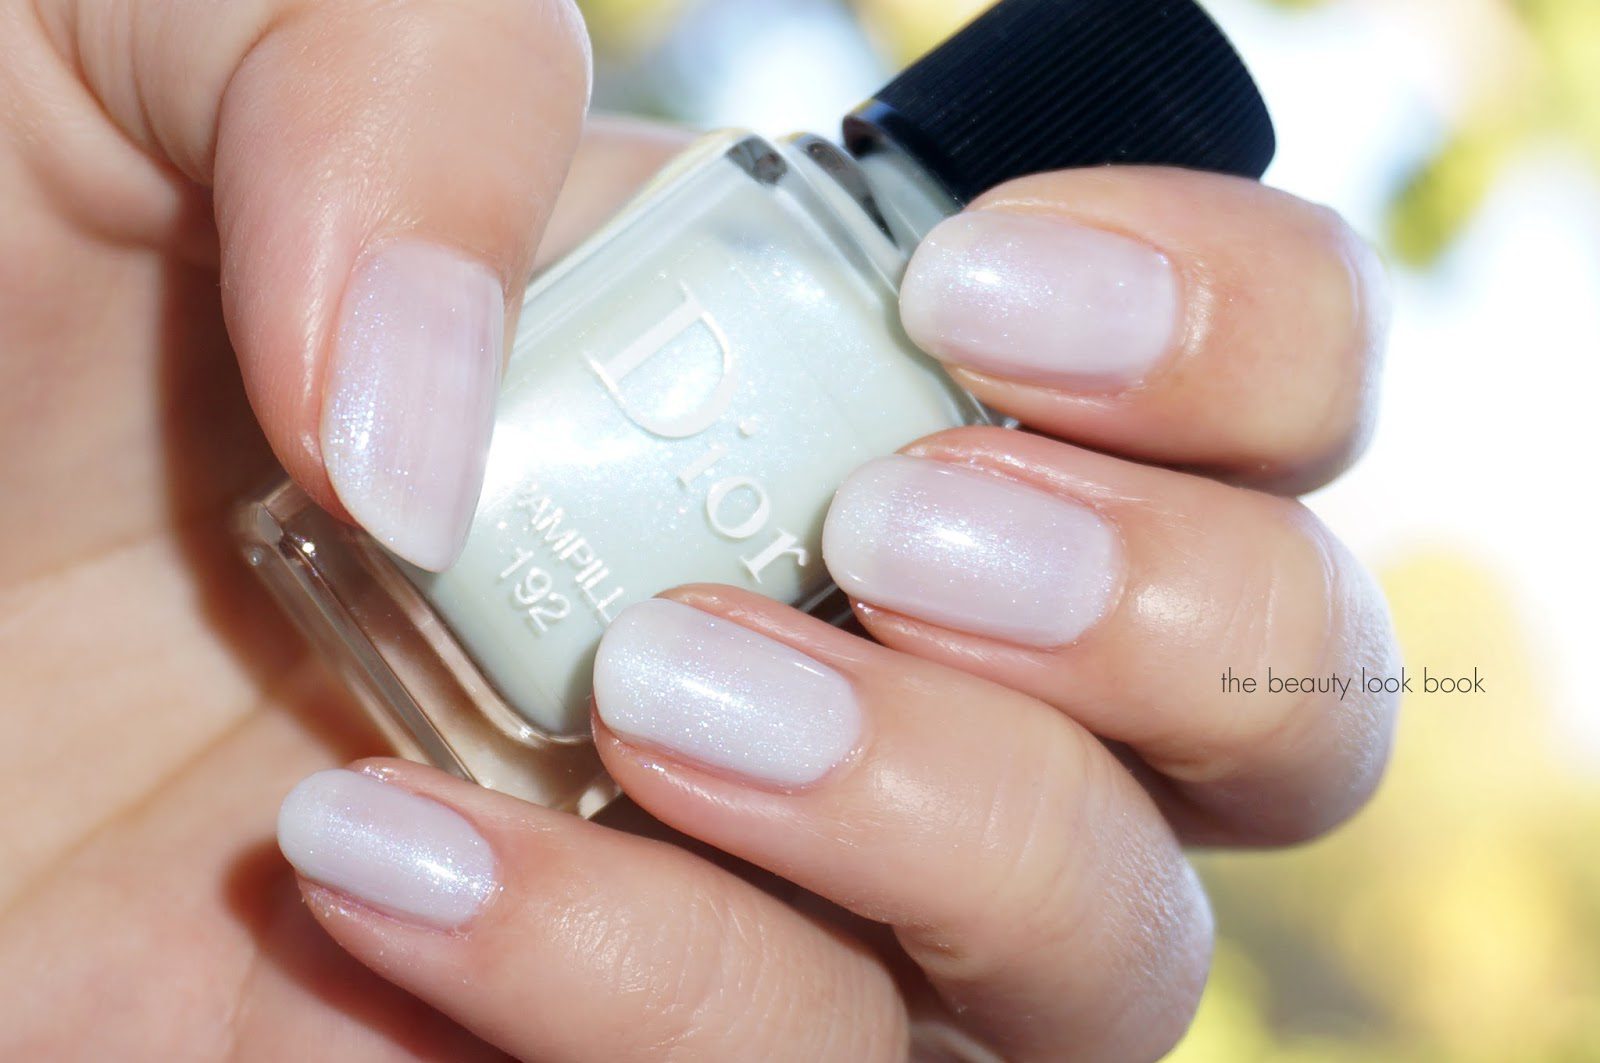 Dior Vernis #204 Porcelaine and #457 Bouquet from Trianon